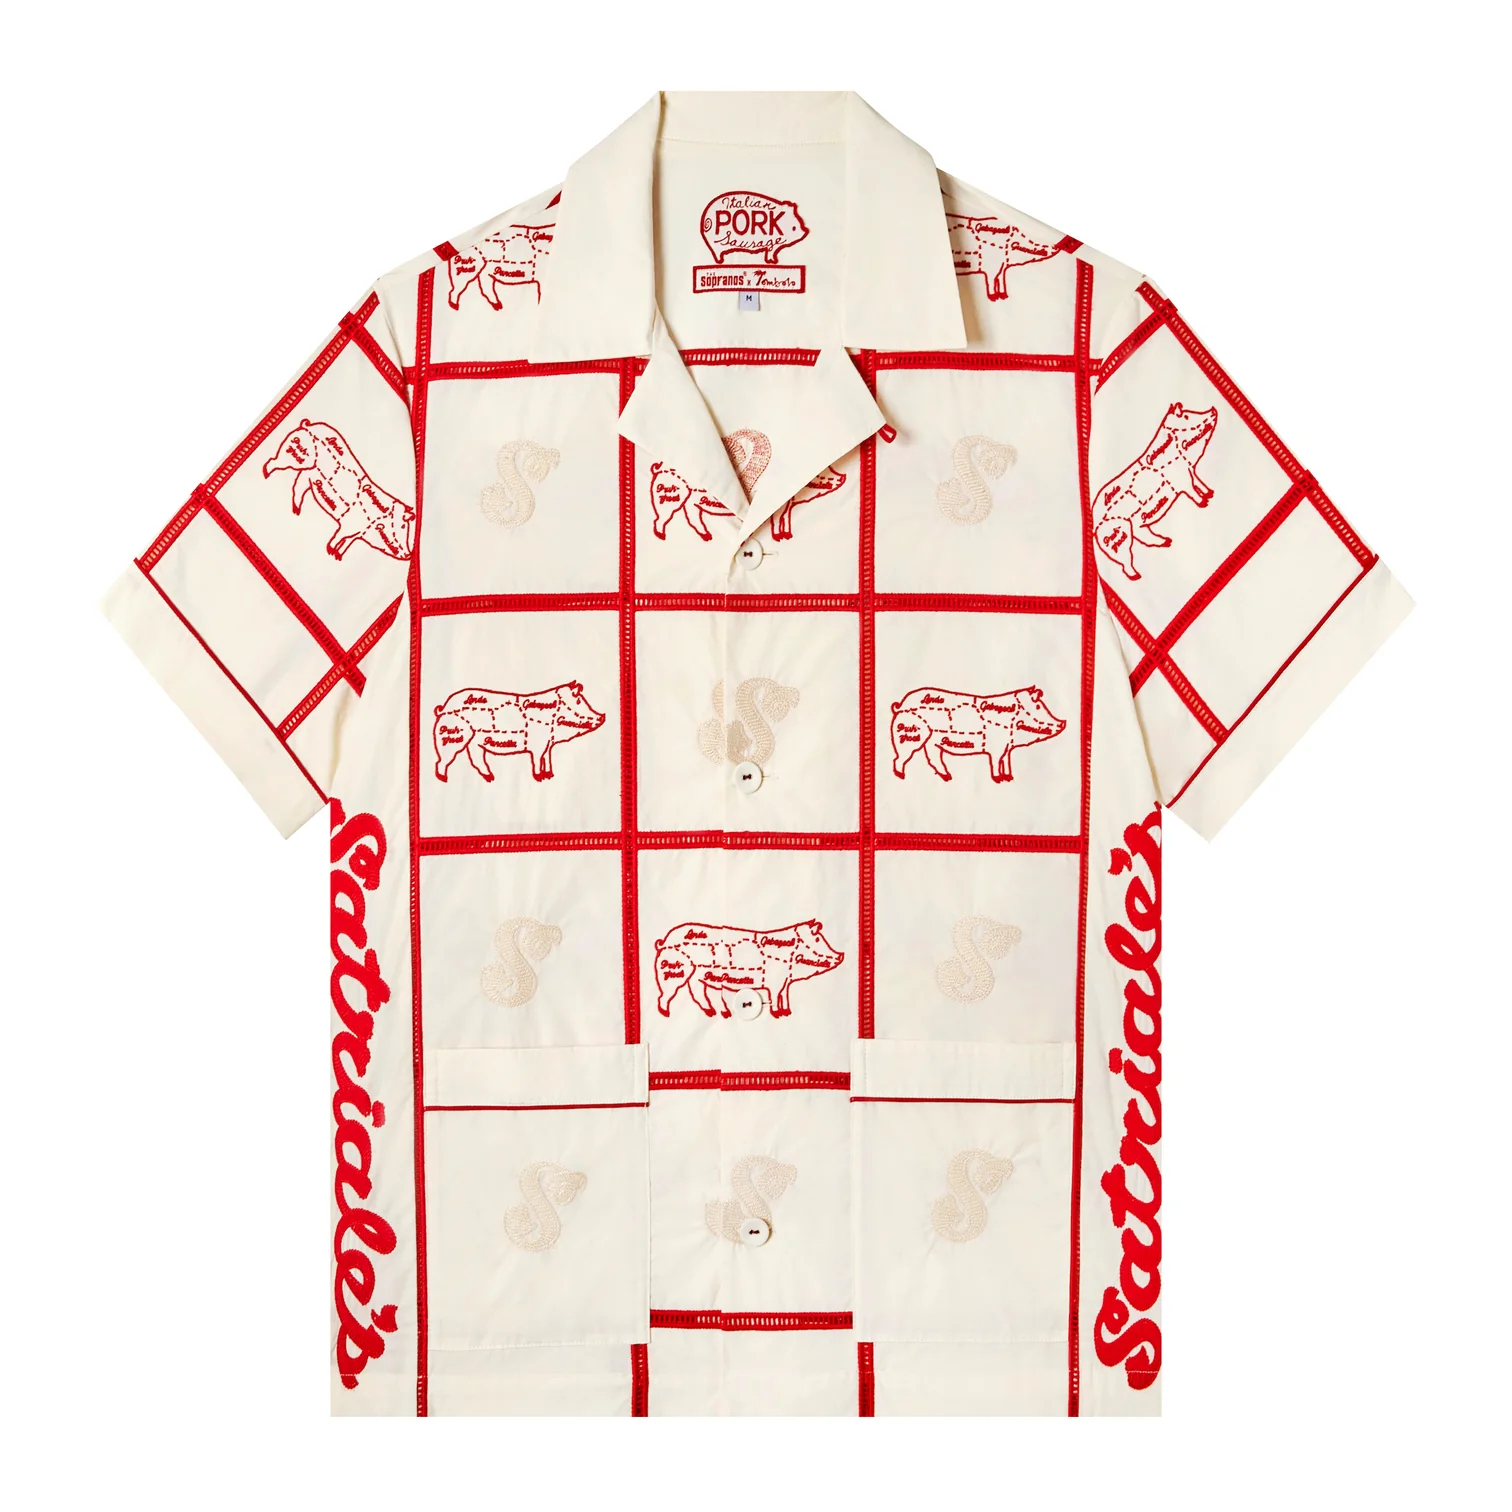 A short-sleeved button-down shirt featuring a pattern of pigs and a grid design. The shirt also has the word &quot;Satriale&#x27;s&quot; written on the sleeves